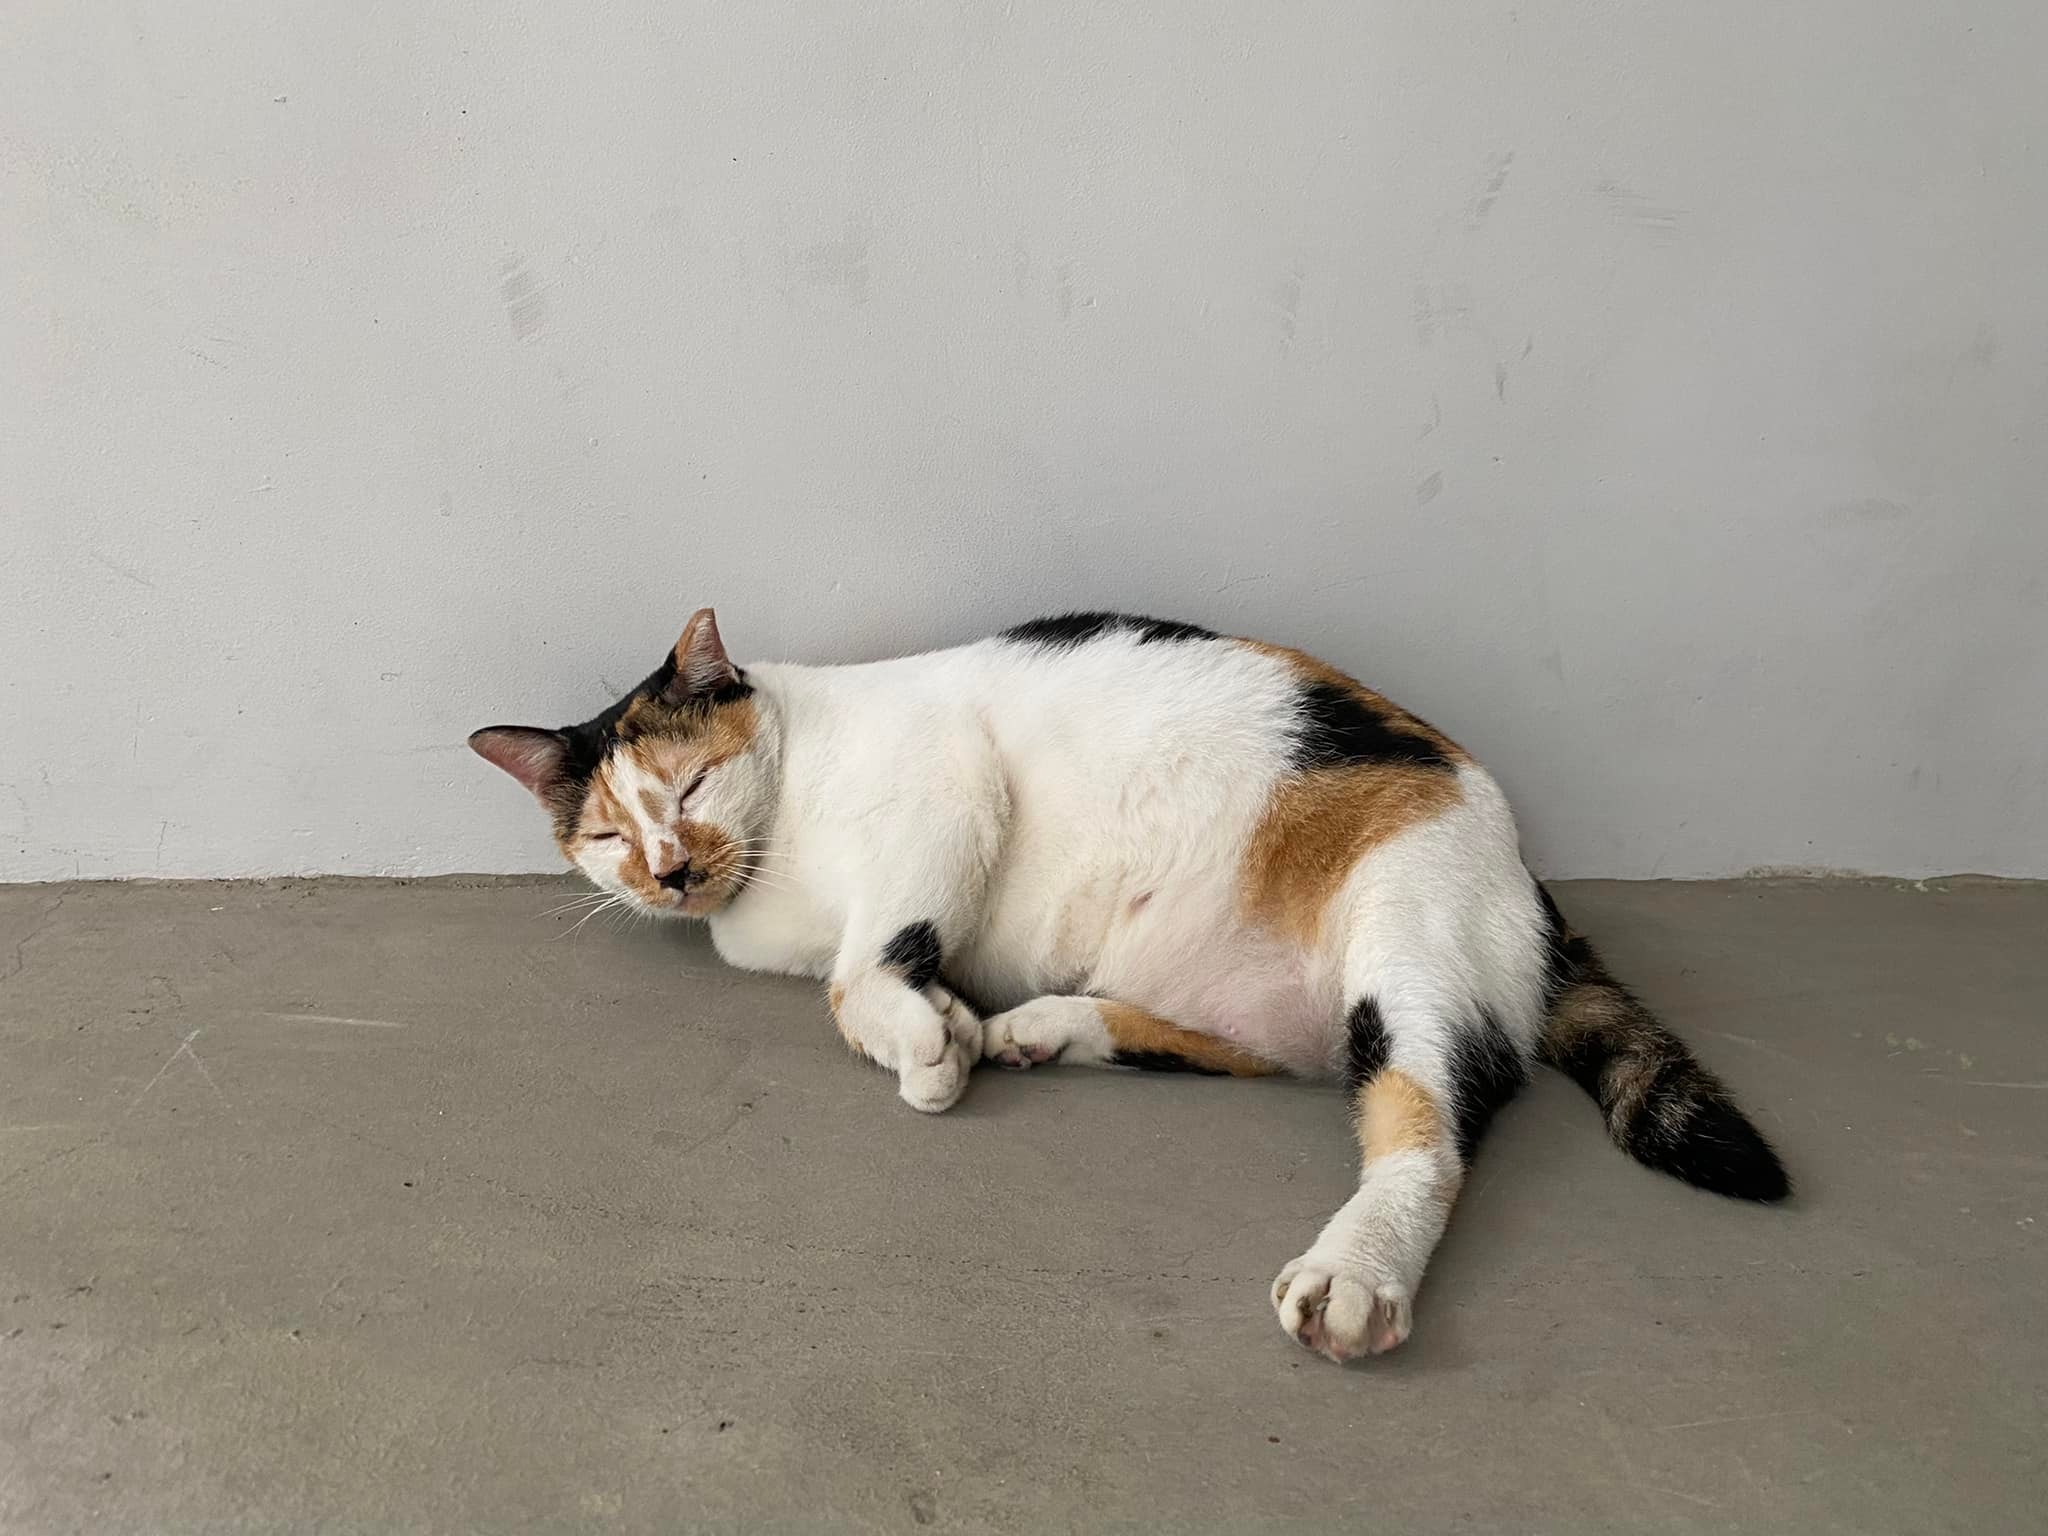 Chonky calico cat in Woodlands shares mattress & meal with cat friend -   - News from Singapore, Asia and around the world